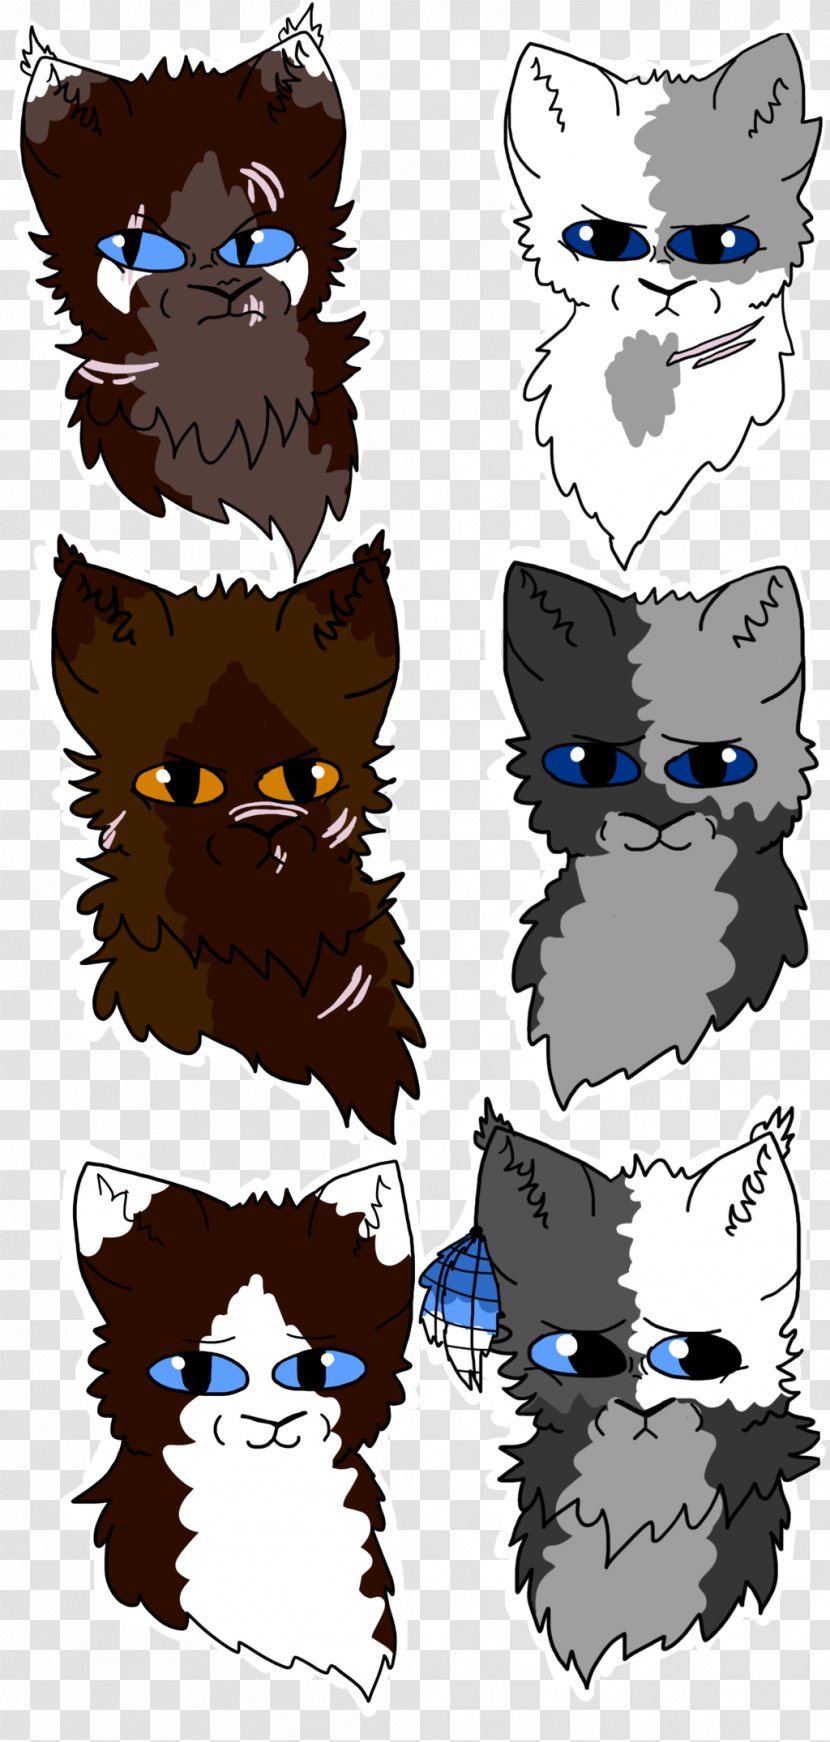 Cat Family Resemblance Art Illustration - Mother Transparent PNG